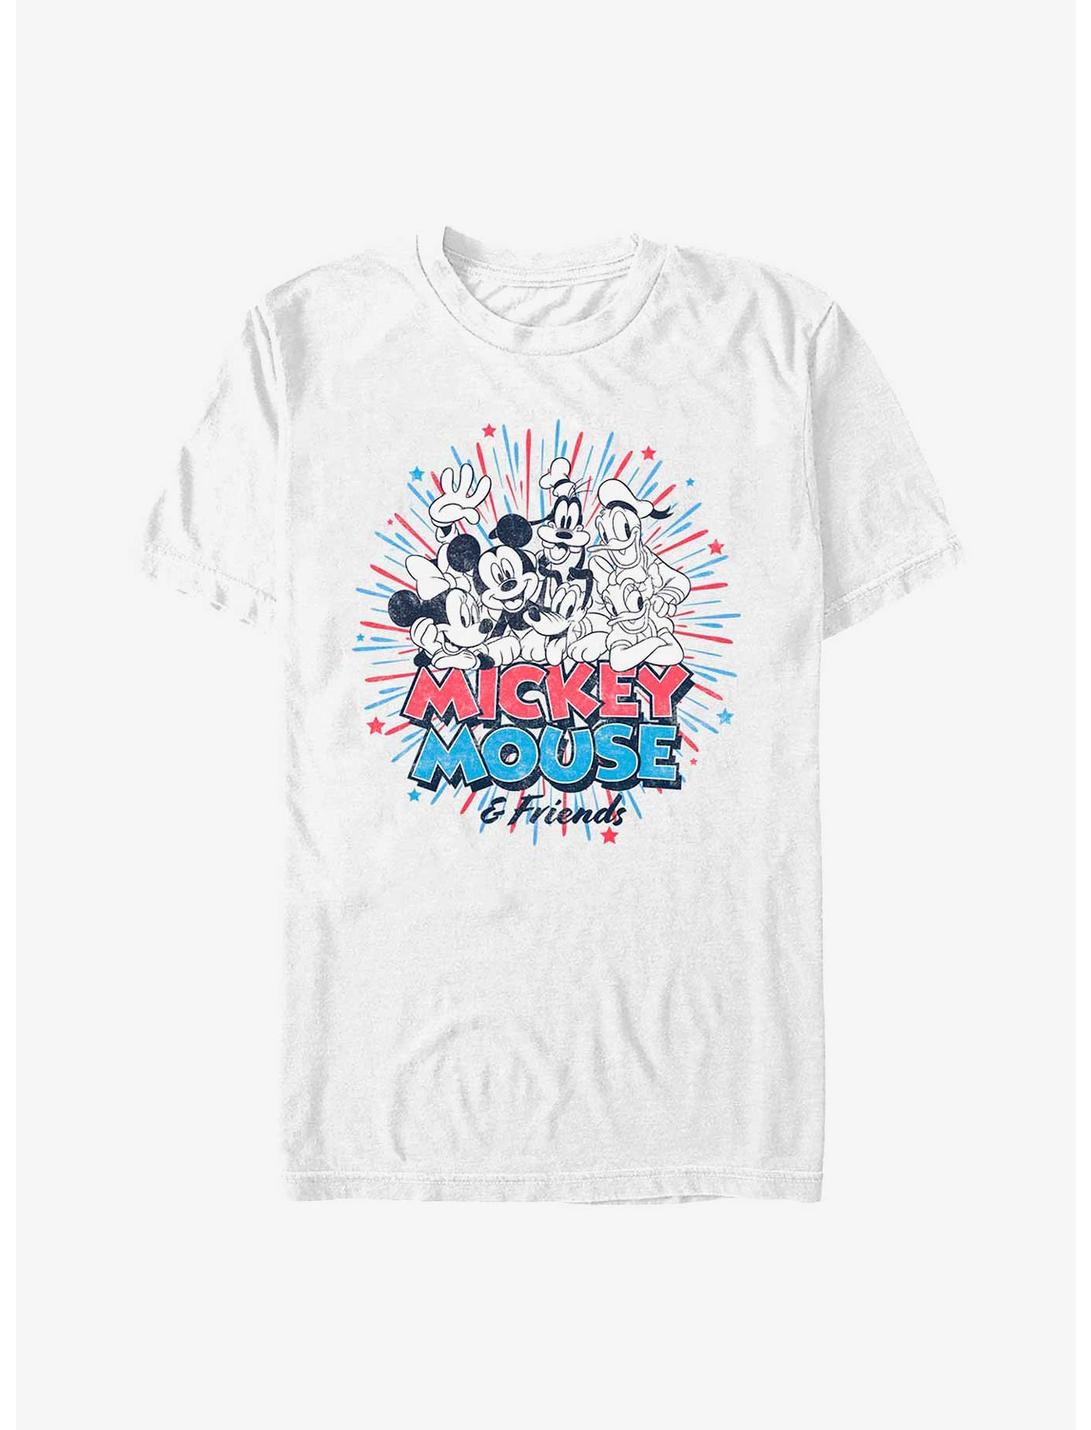 Disney Mickey Mouse Firework Friends T-Shirt, WHITE, hi-res